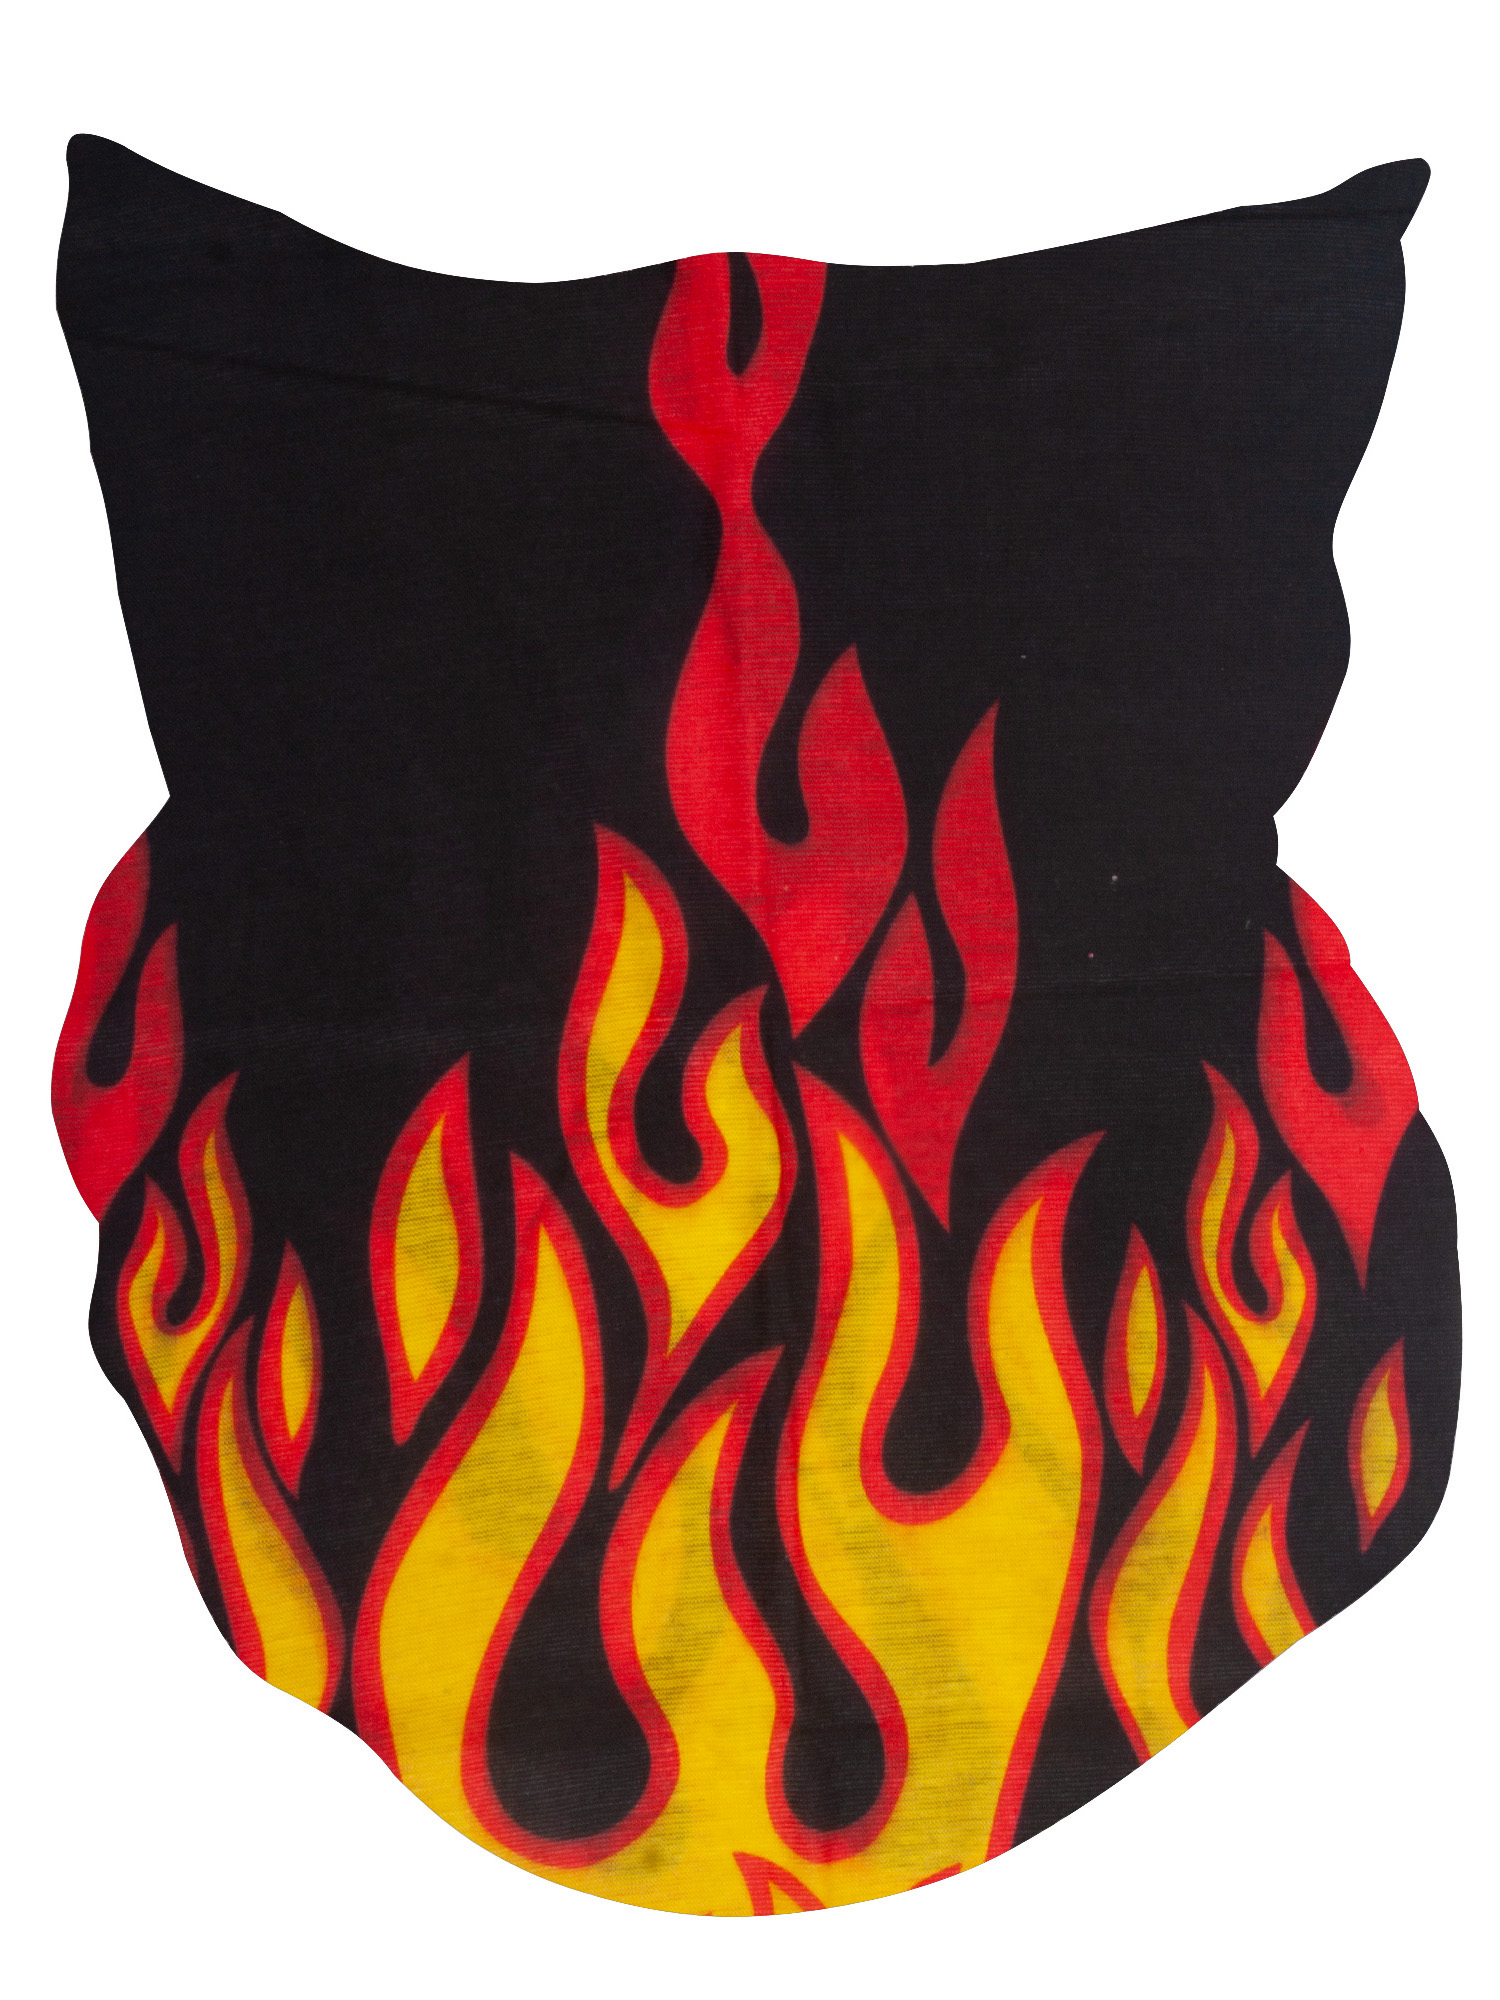 Top Headwear Multifunctional Face Covering Neck Gaiter Scarf - Flames - image 1 of 2